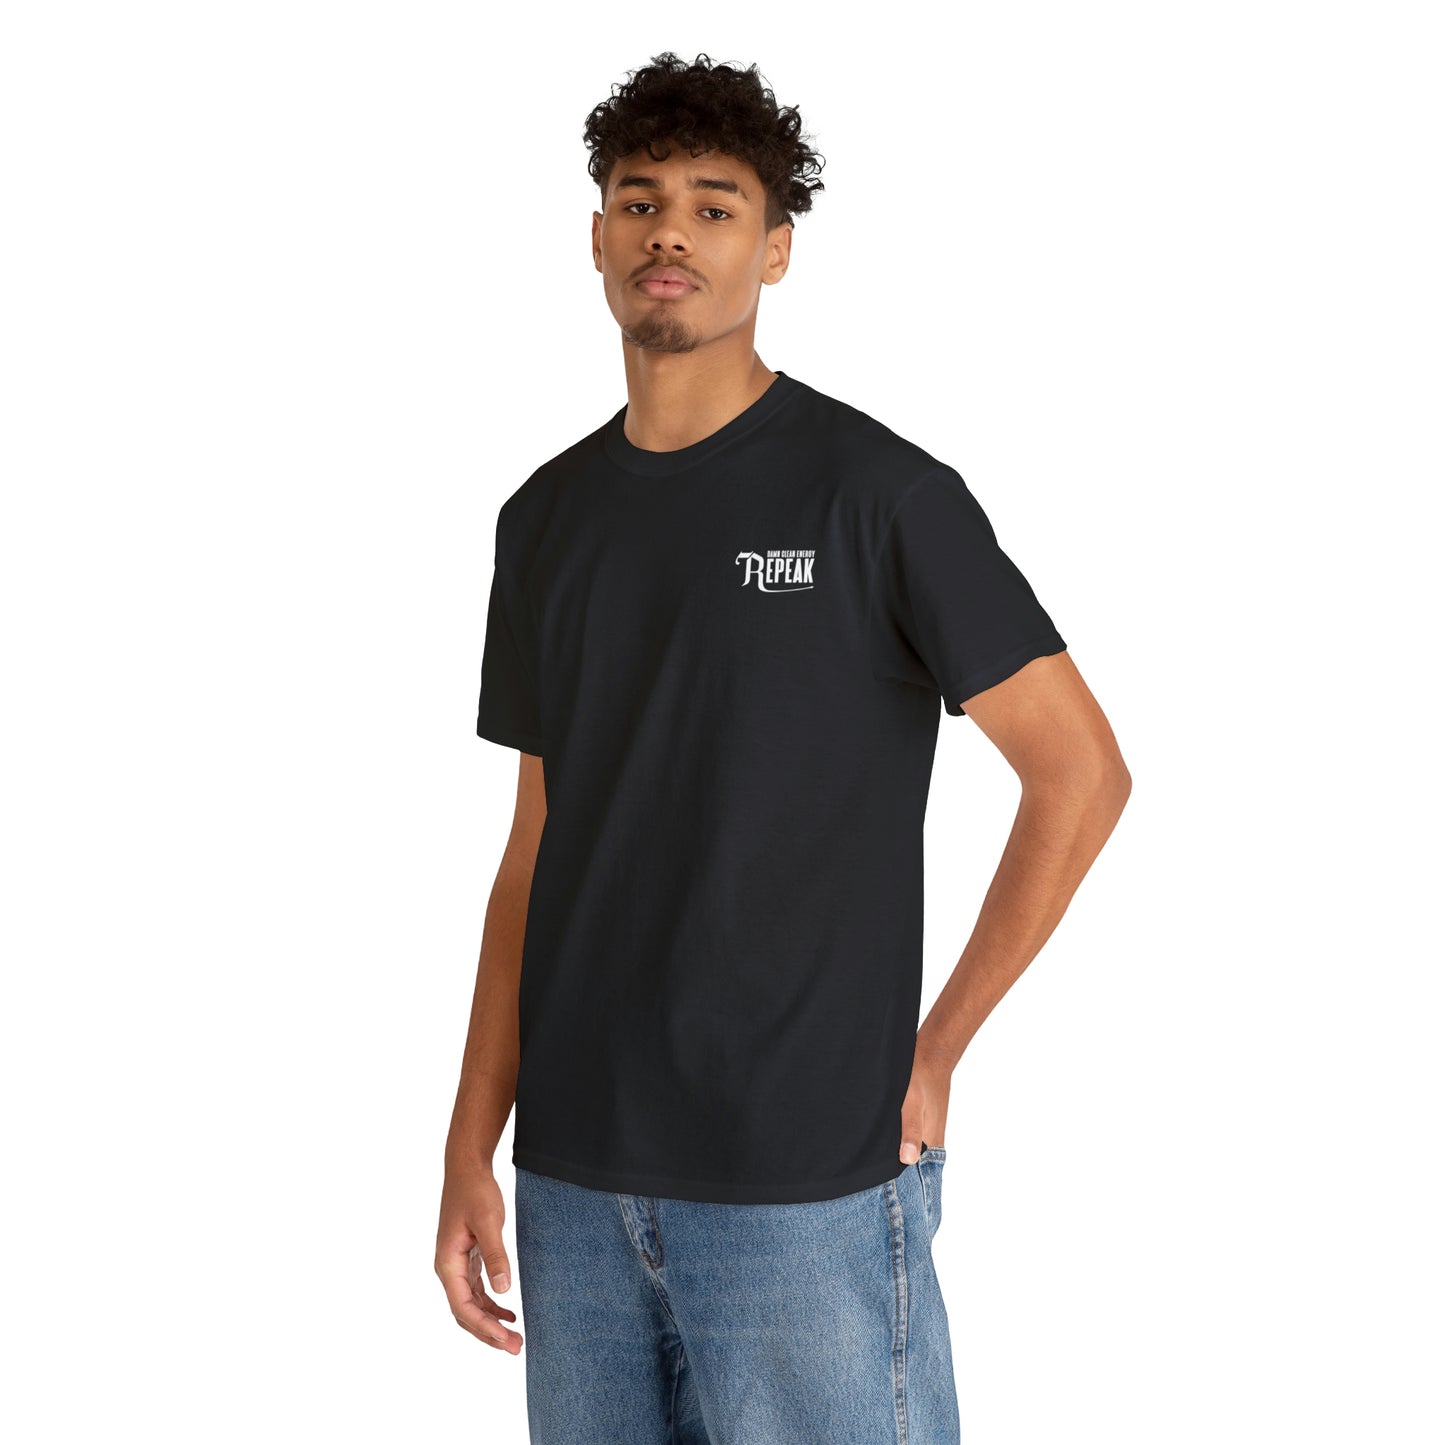 repeak energy drink black t-shirt, front side with male model